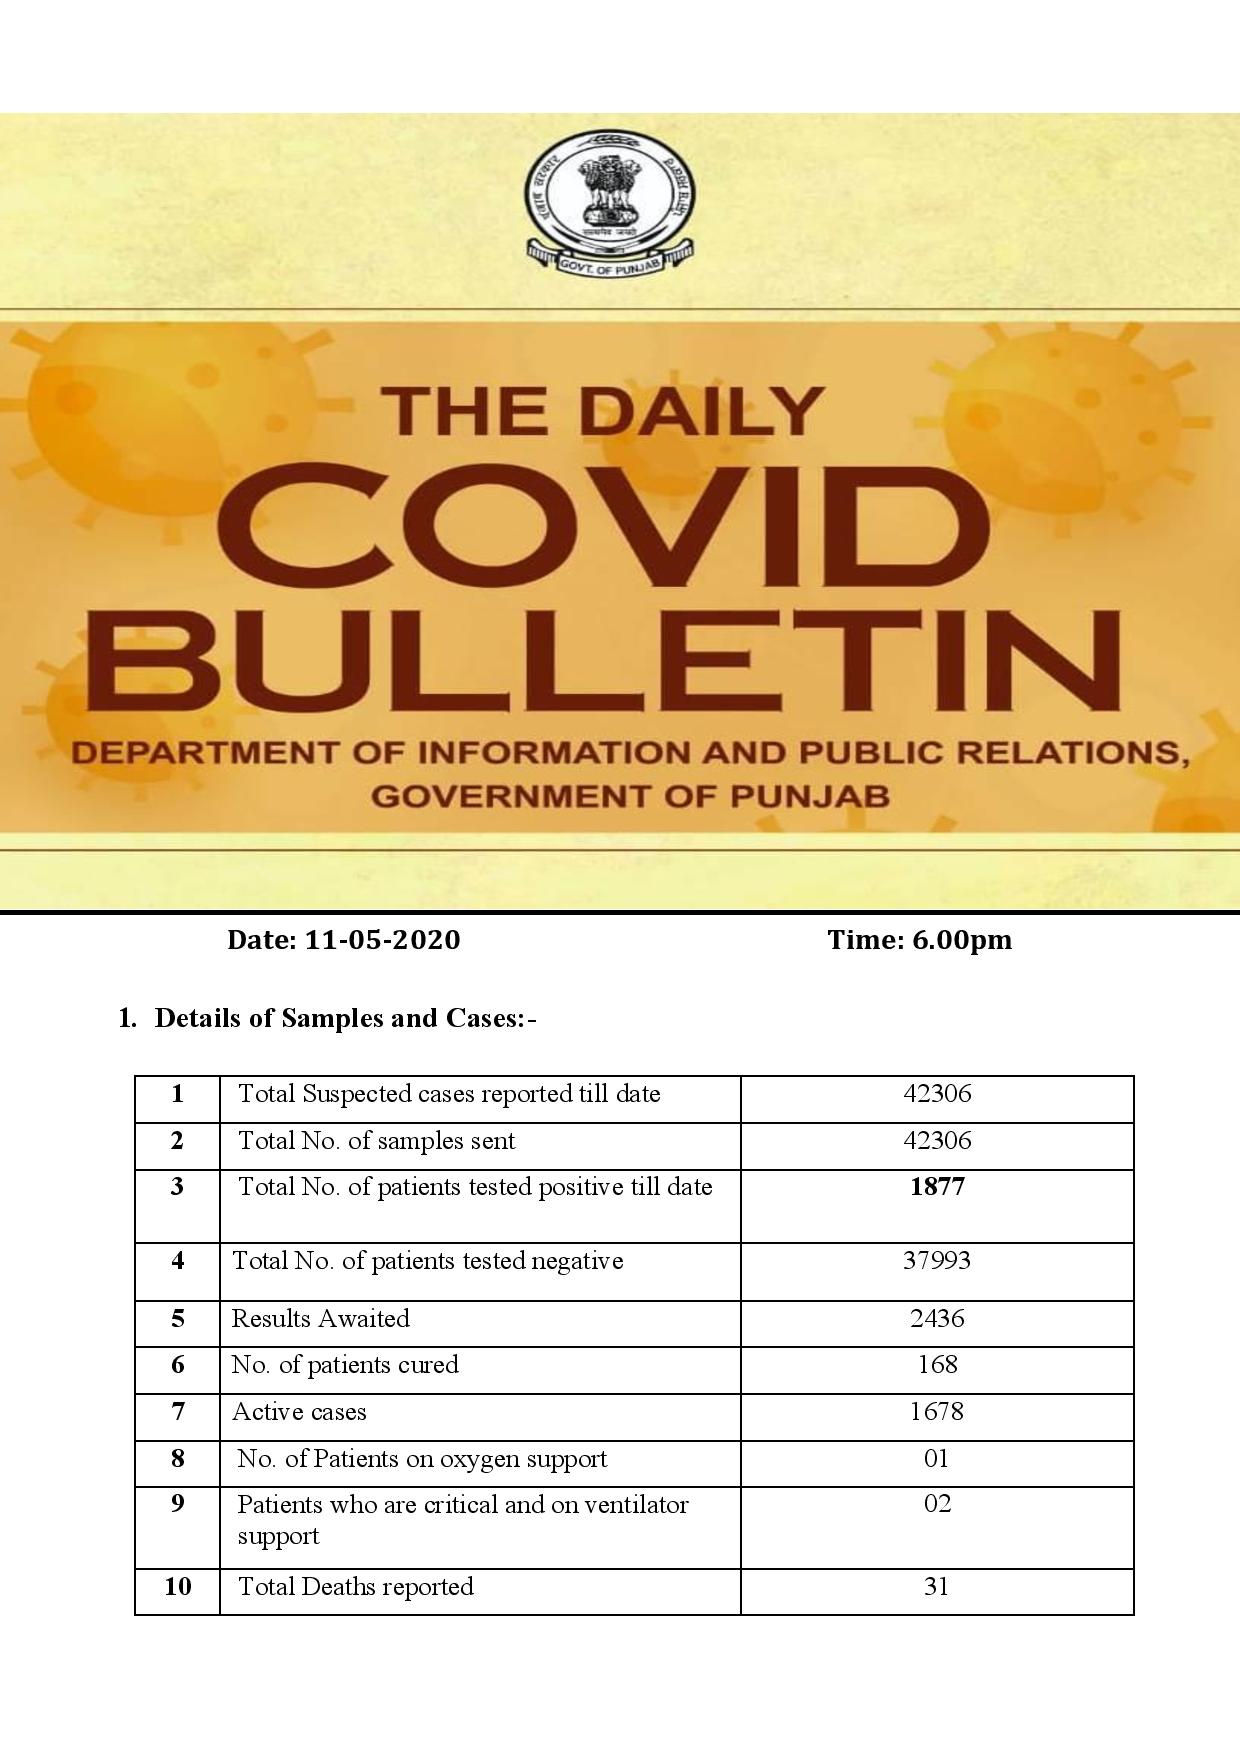 Covid-19 update; daily fluctuating figures keeps Punjab on toes